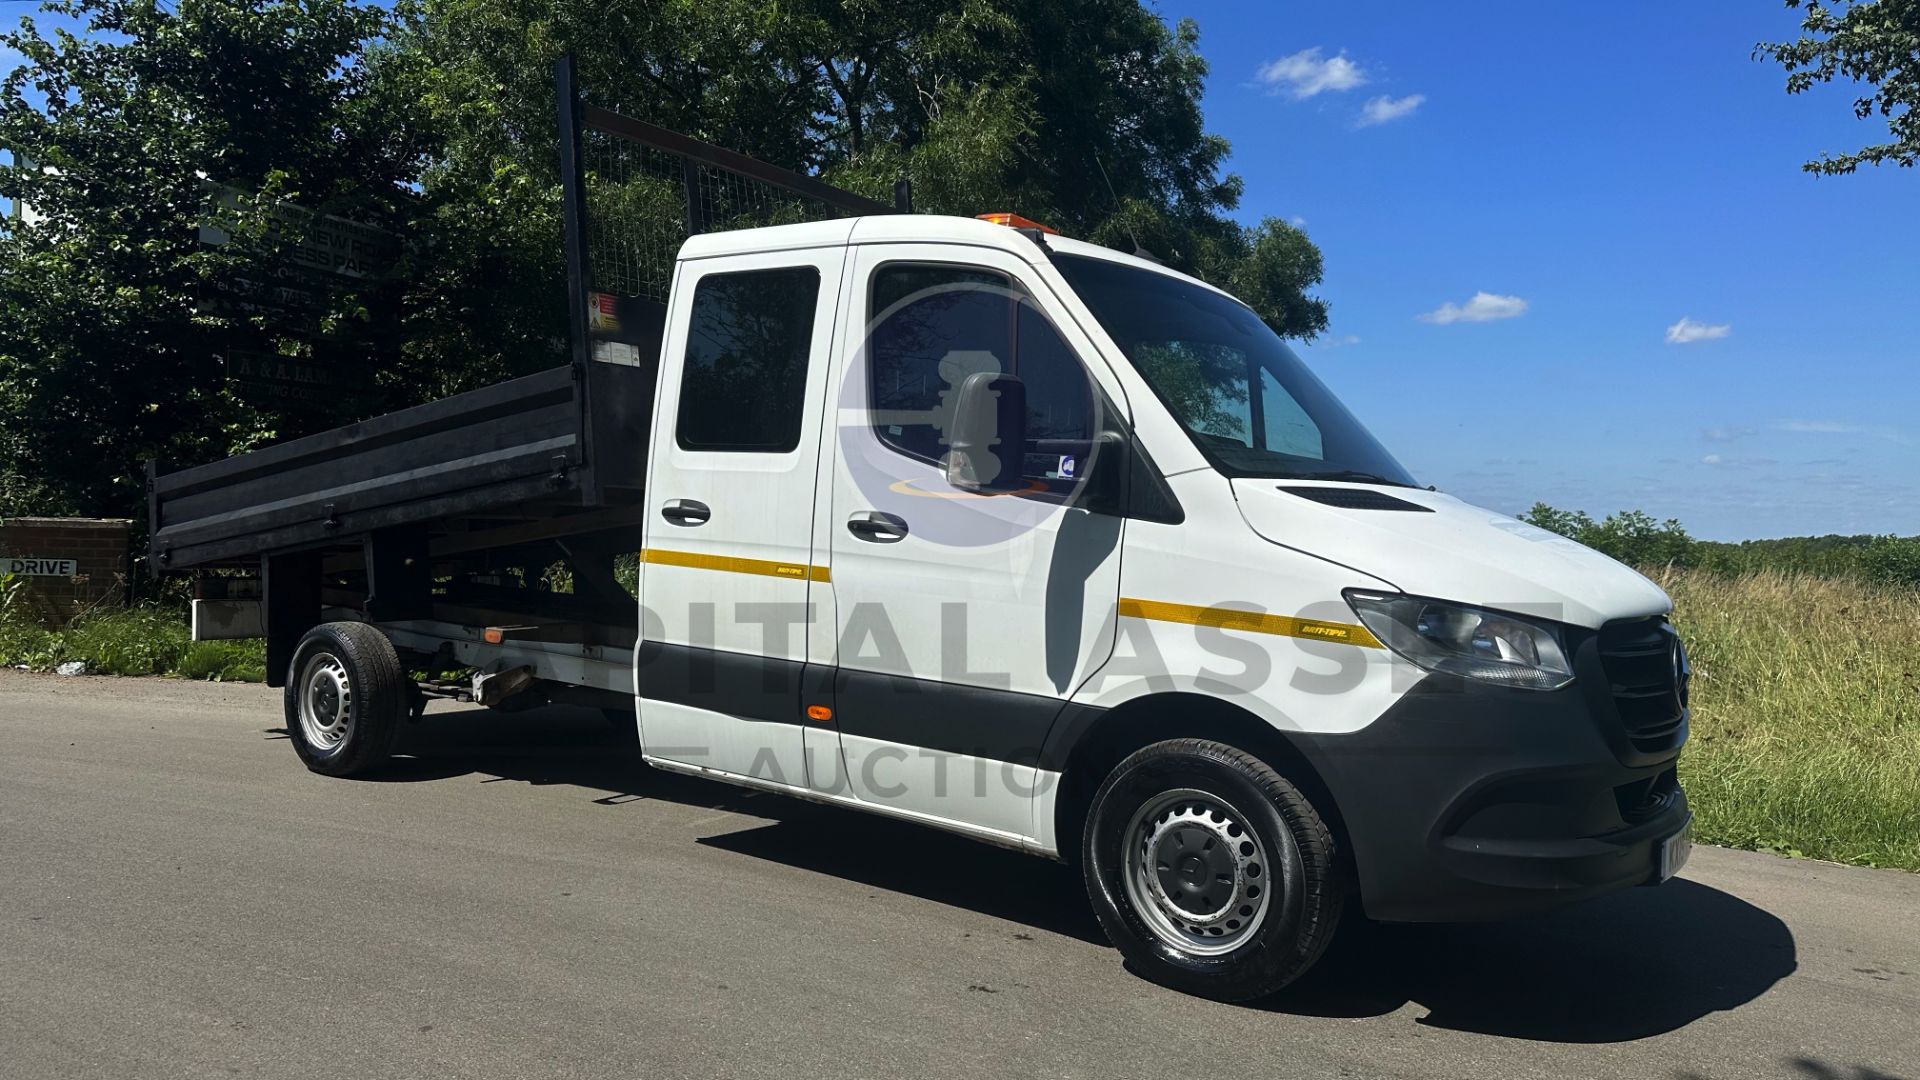 (ON SALE) MERCEDES-BENZ SPRINTER 314 CDI *LWB - UTILITY D/CAB TIPPER* (2019 - NEW MODEL) (57K ONLY) - Image 2 of 37